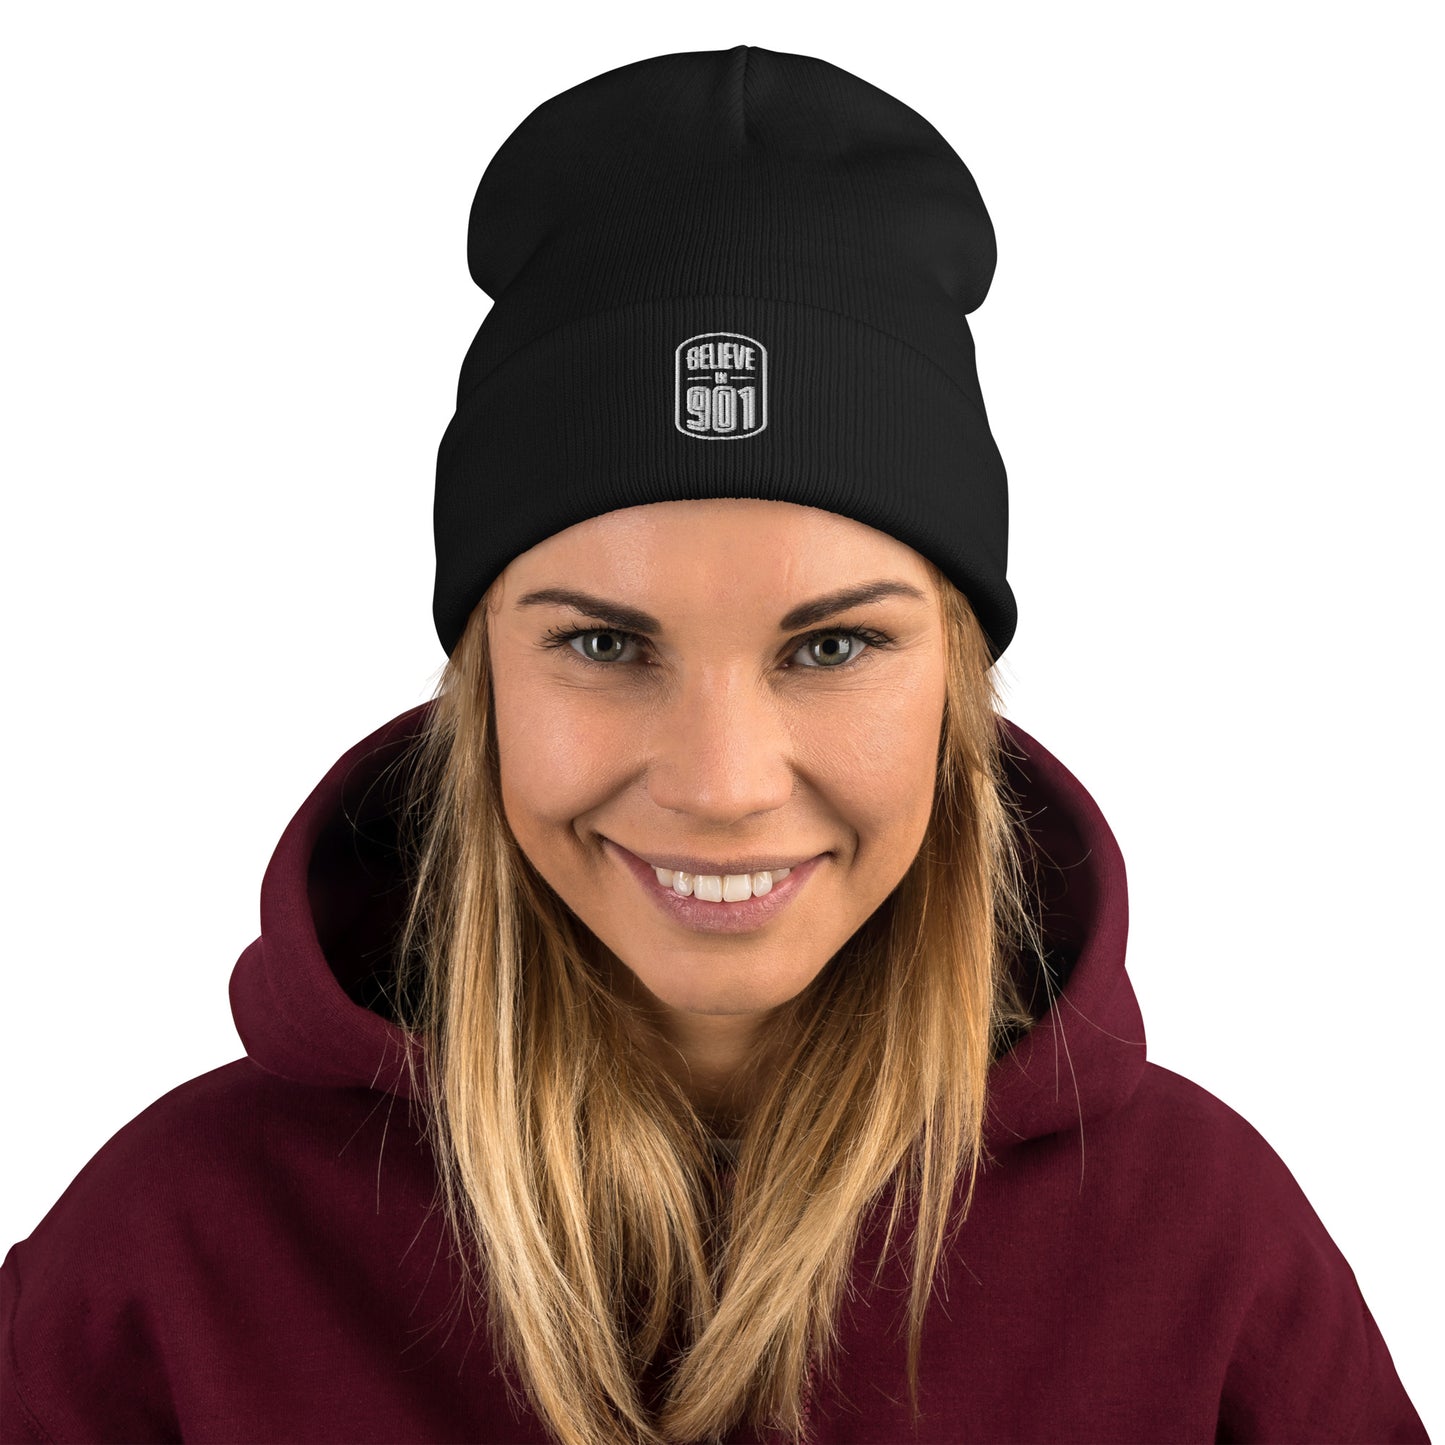 Believe in 901 Embroidered Beanie